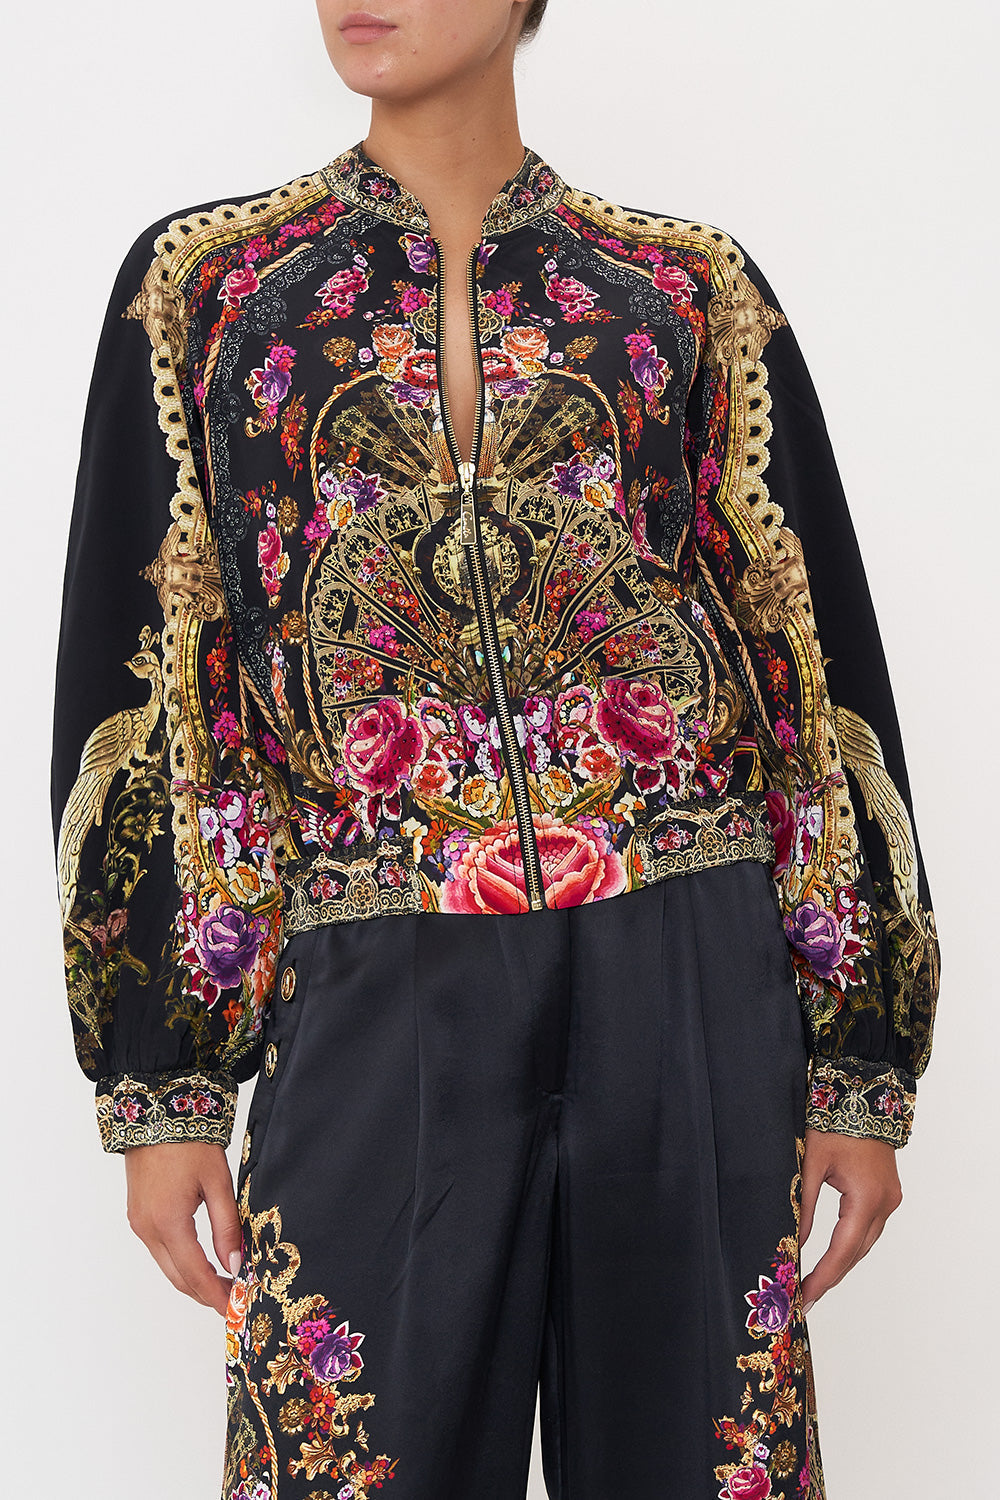 BOMBER JACKET WITH SHIRRED CUFF DANCE WITH DUENDE